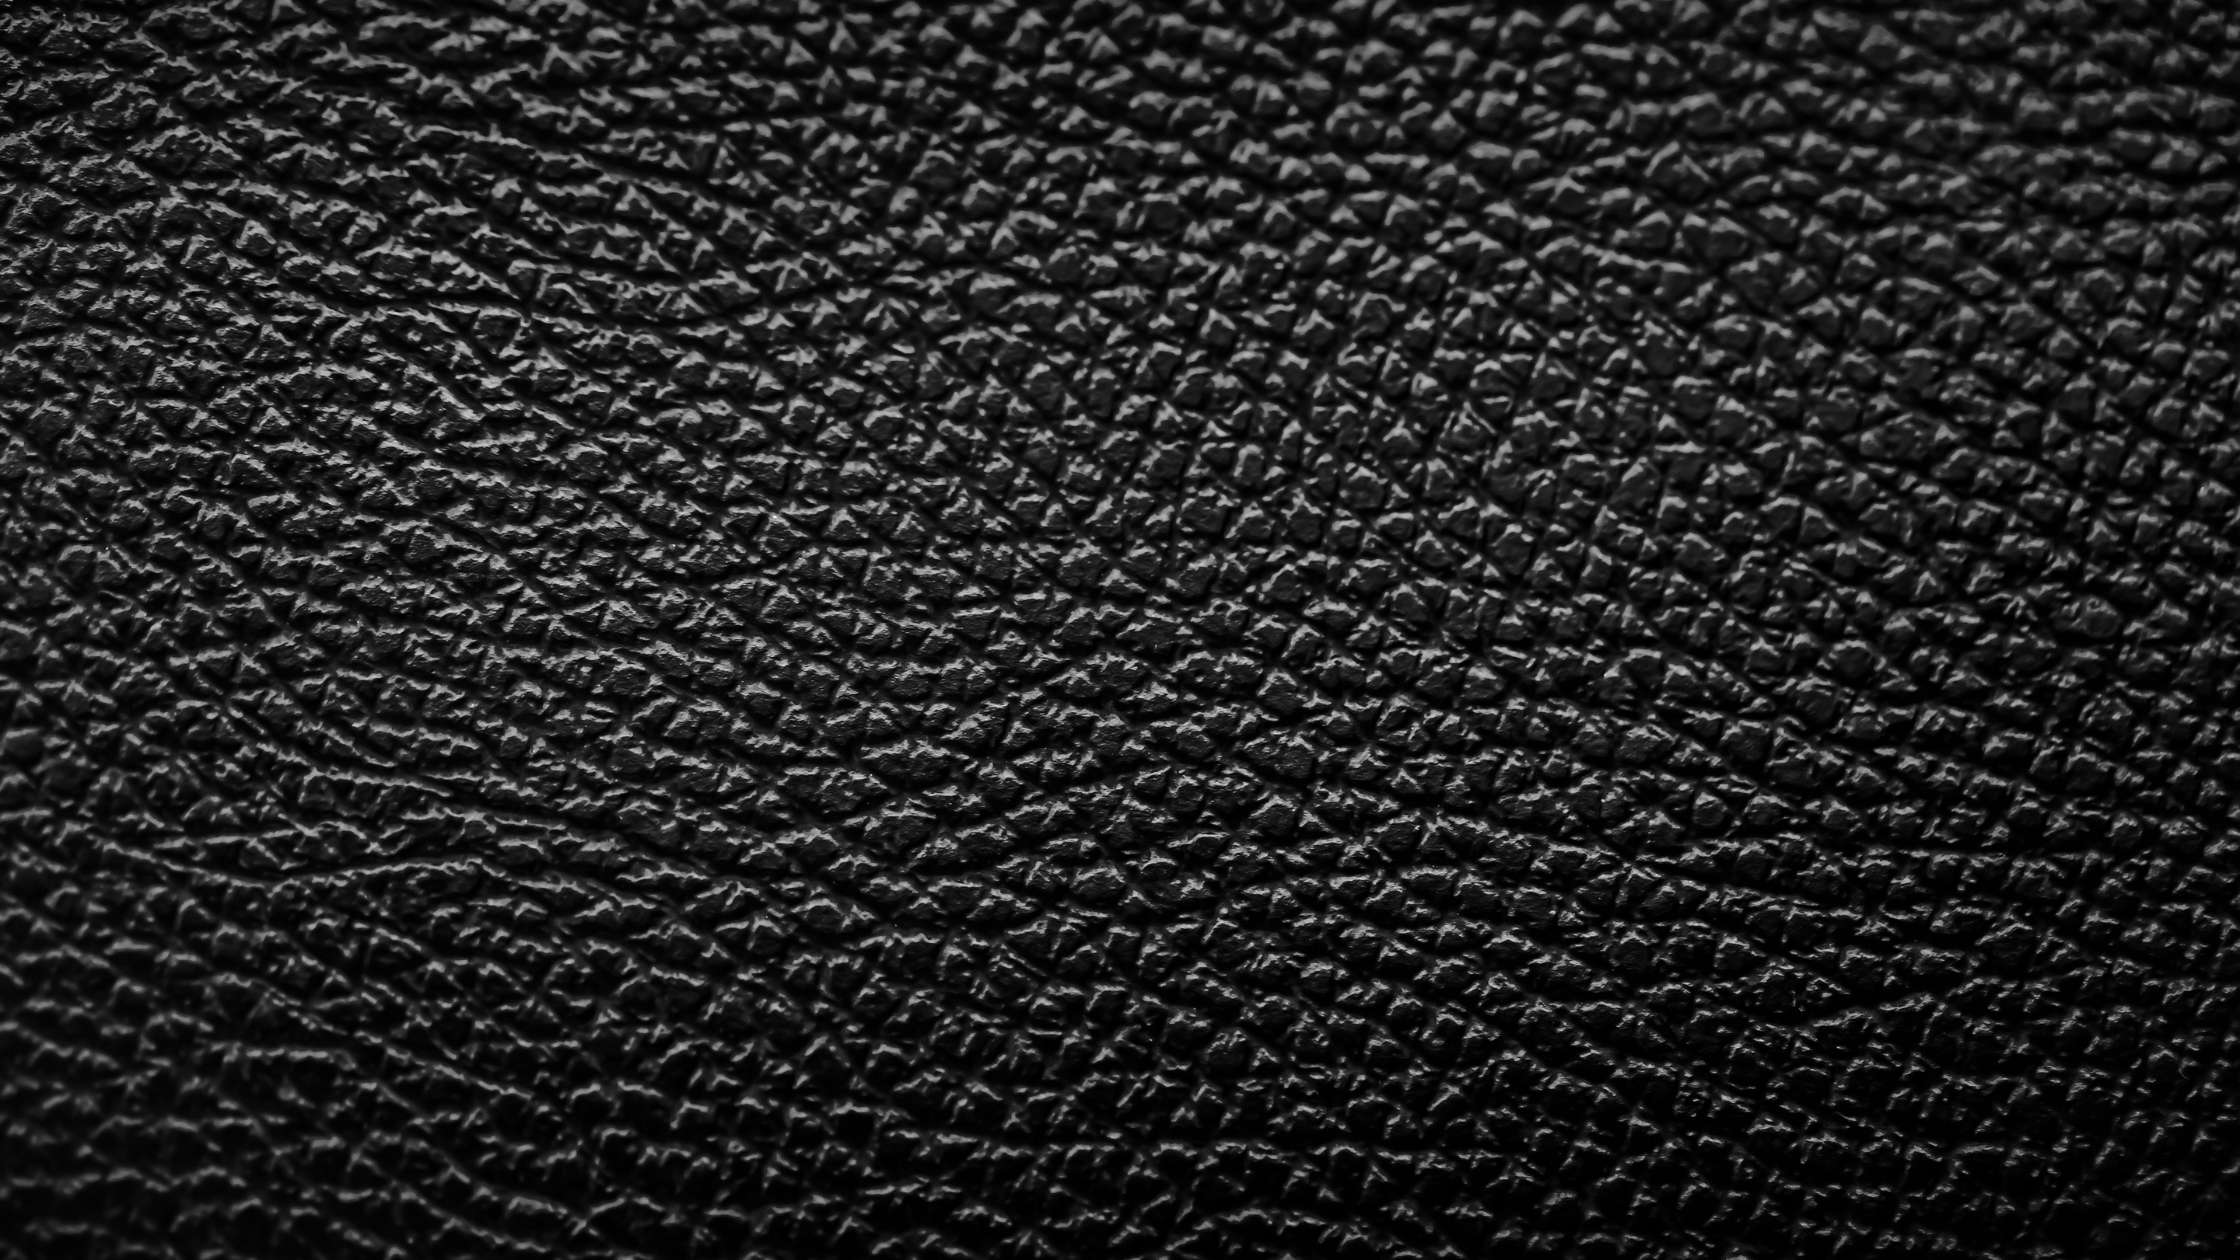 Many vehicles, clothing items, accessories, and items incorporate leather materials. The different types of leather can provide various visual and practical components suitable for the different uses of each product.